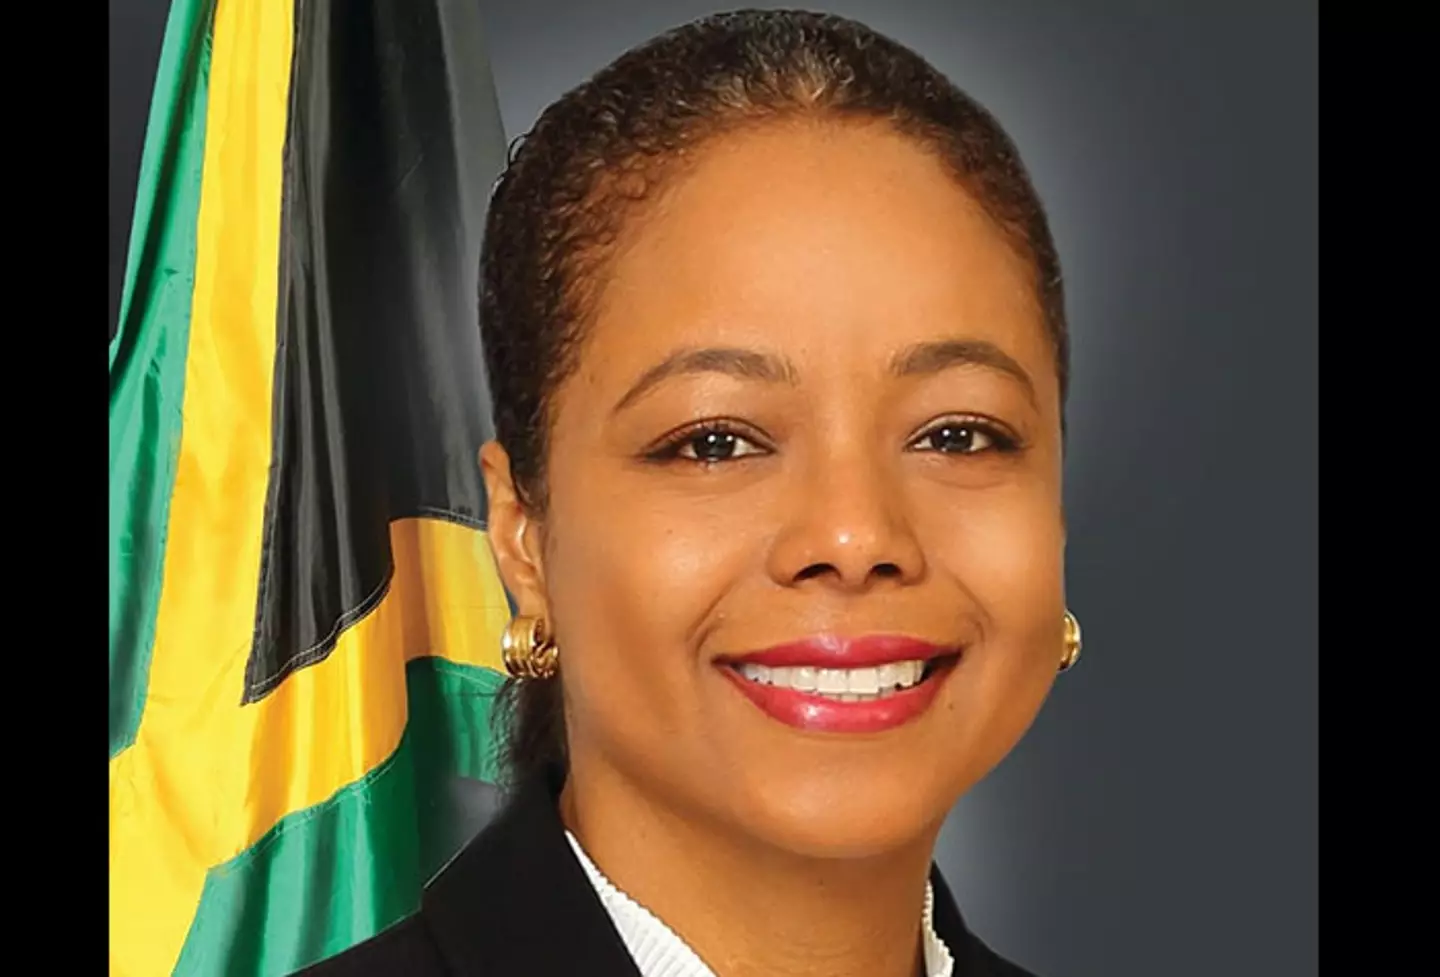 Jamaican politician Marlene Malahoo Forte QC announced the changes in parliament.